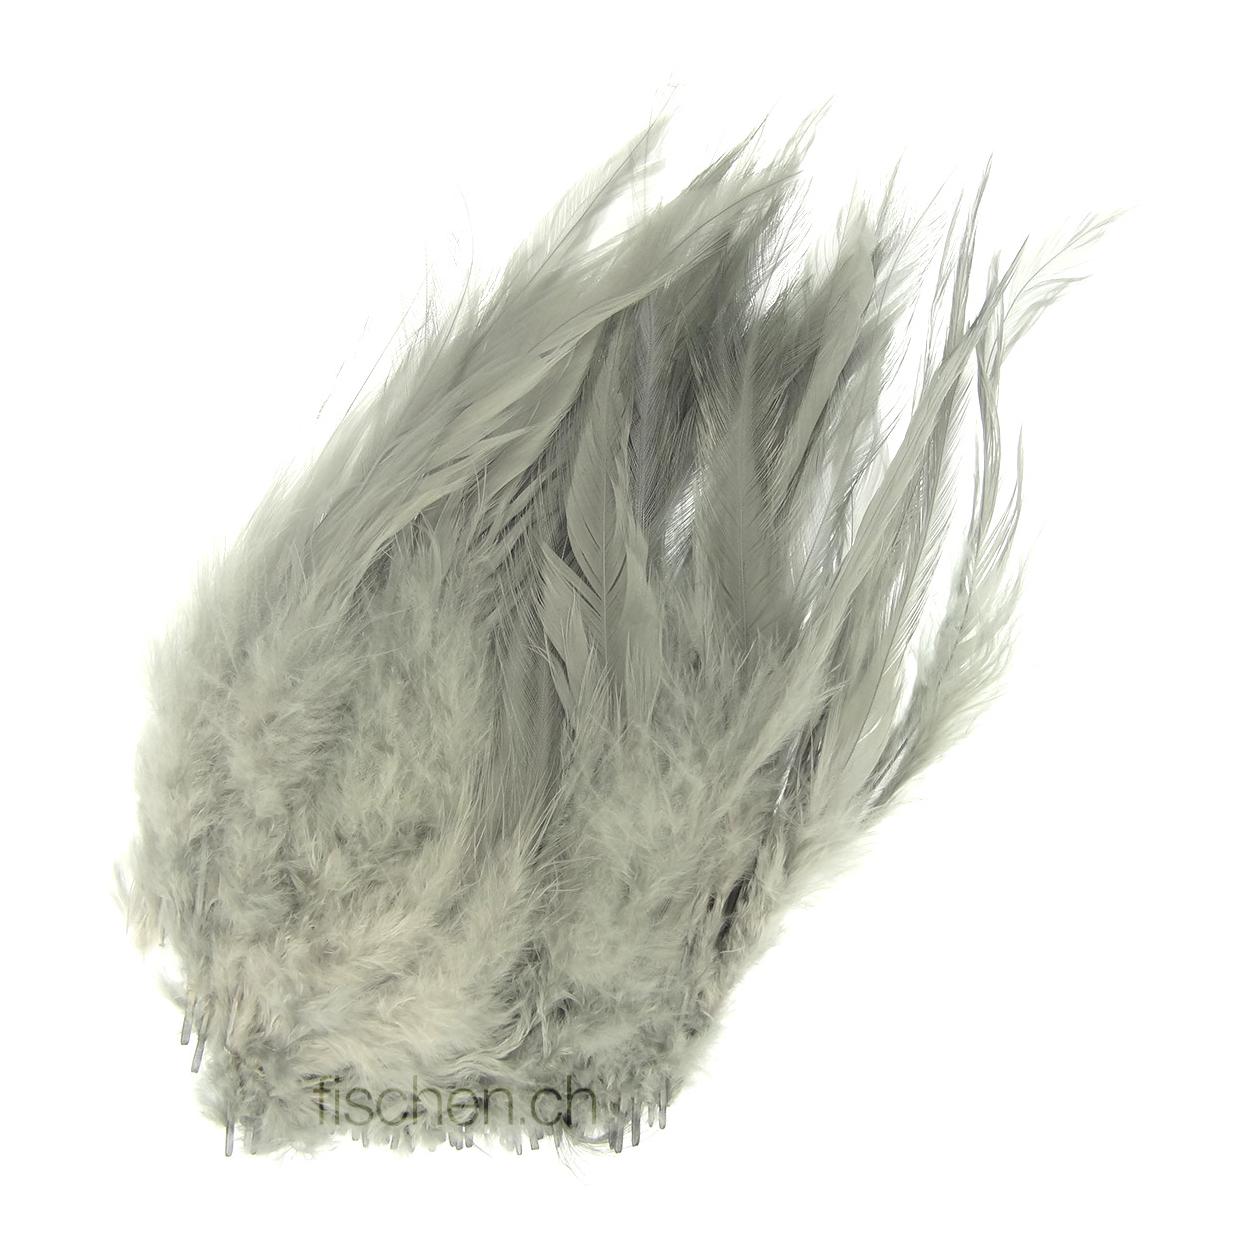 Image of Hareline Dubbin Strung Chinese Saddle Hackle - Gray bei fischen.ch